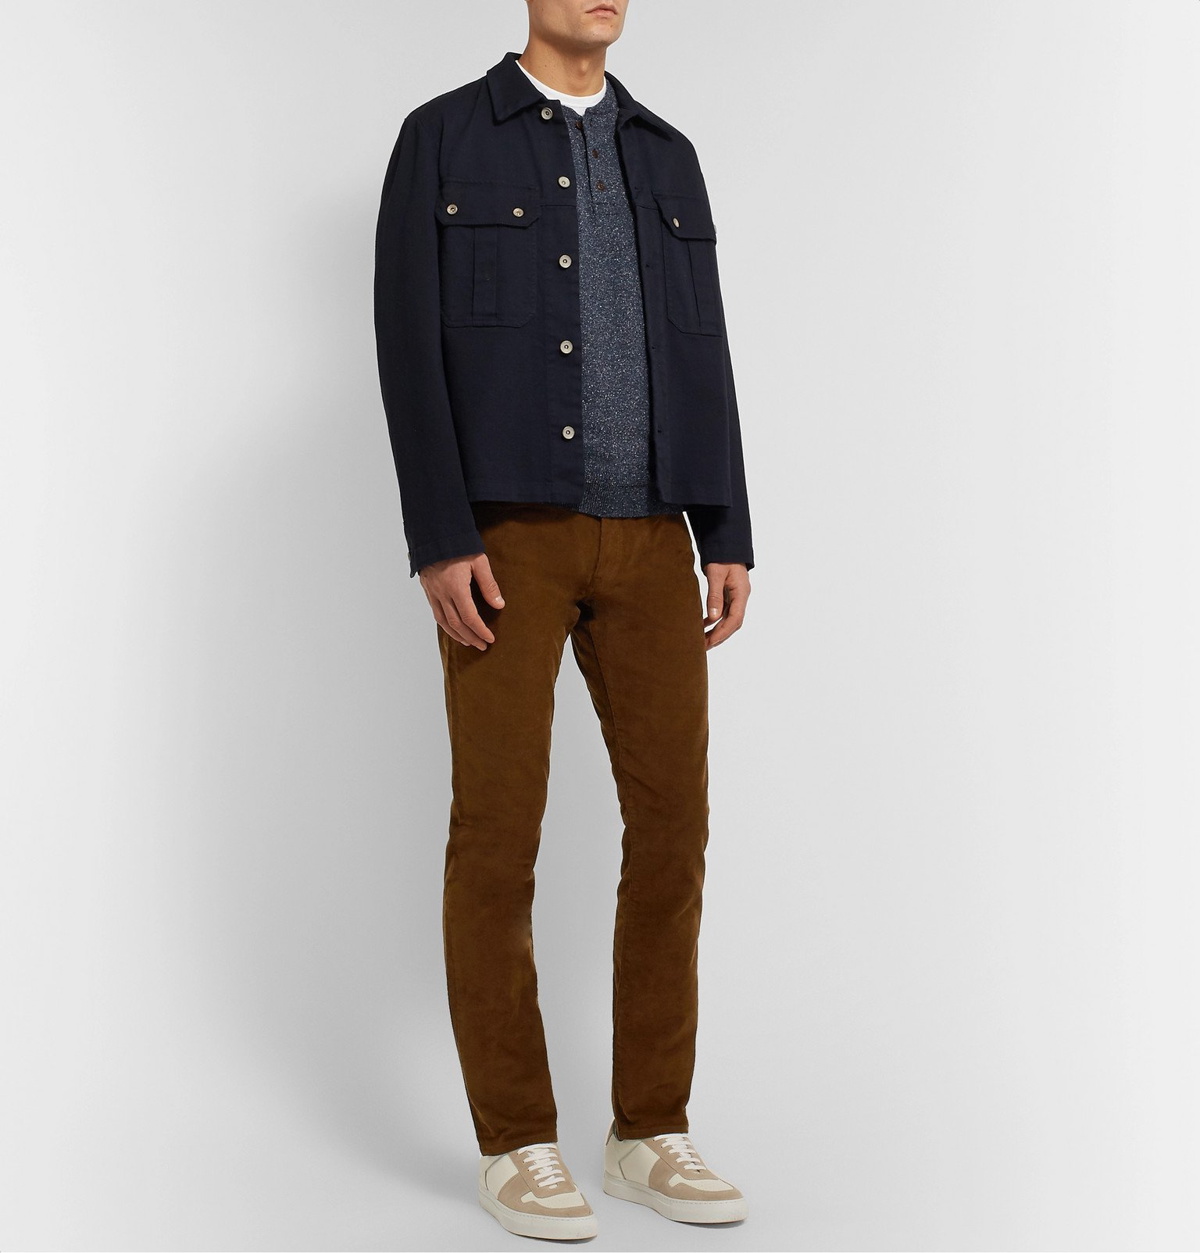 J.Crew Tall Campbell Trouser In Two Way Stretch Cotton, $98, J.Crew